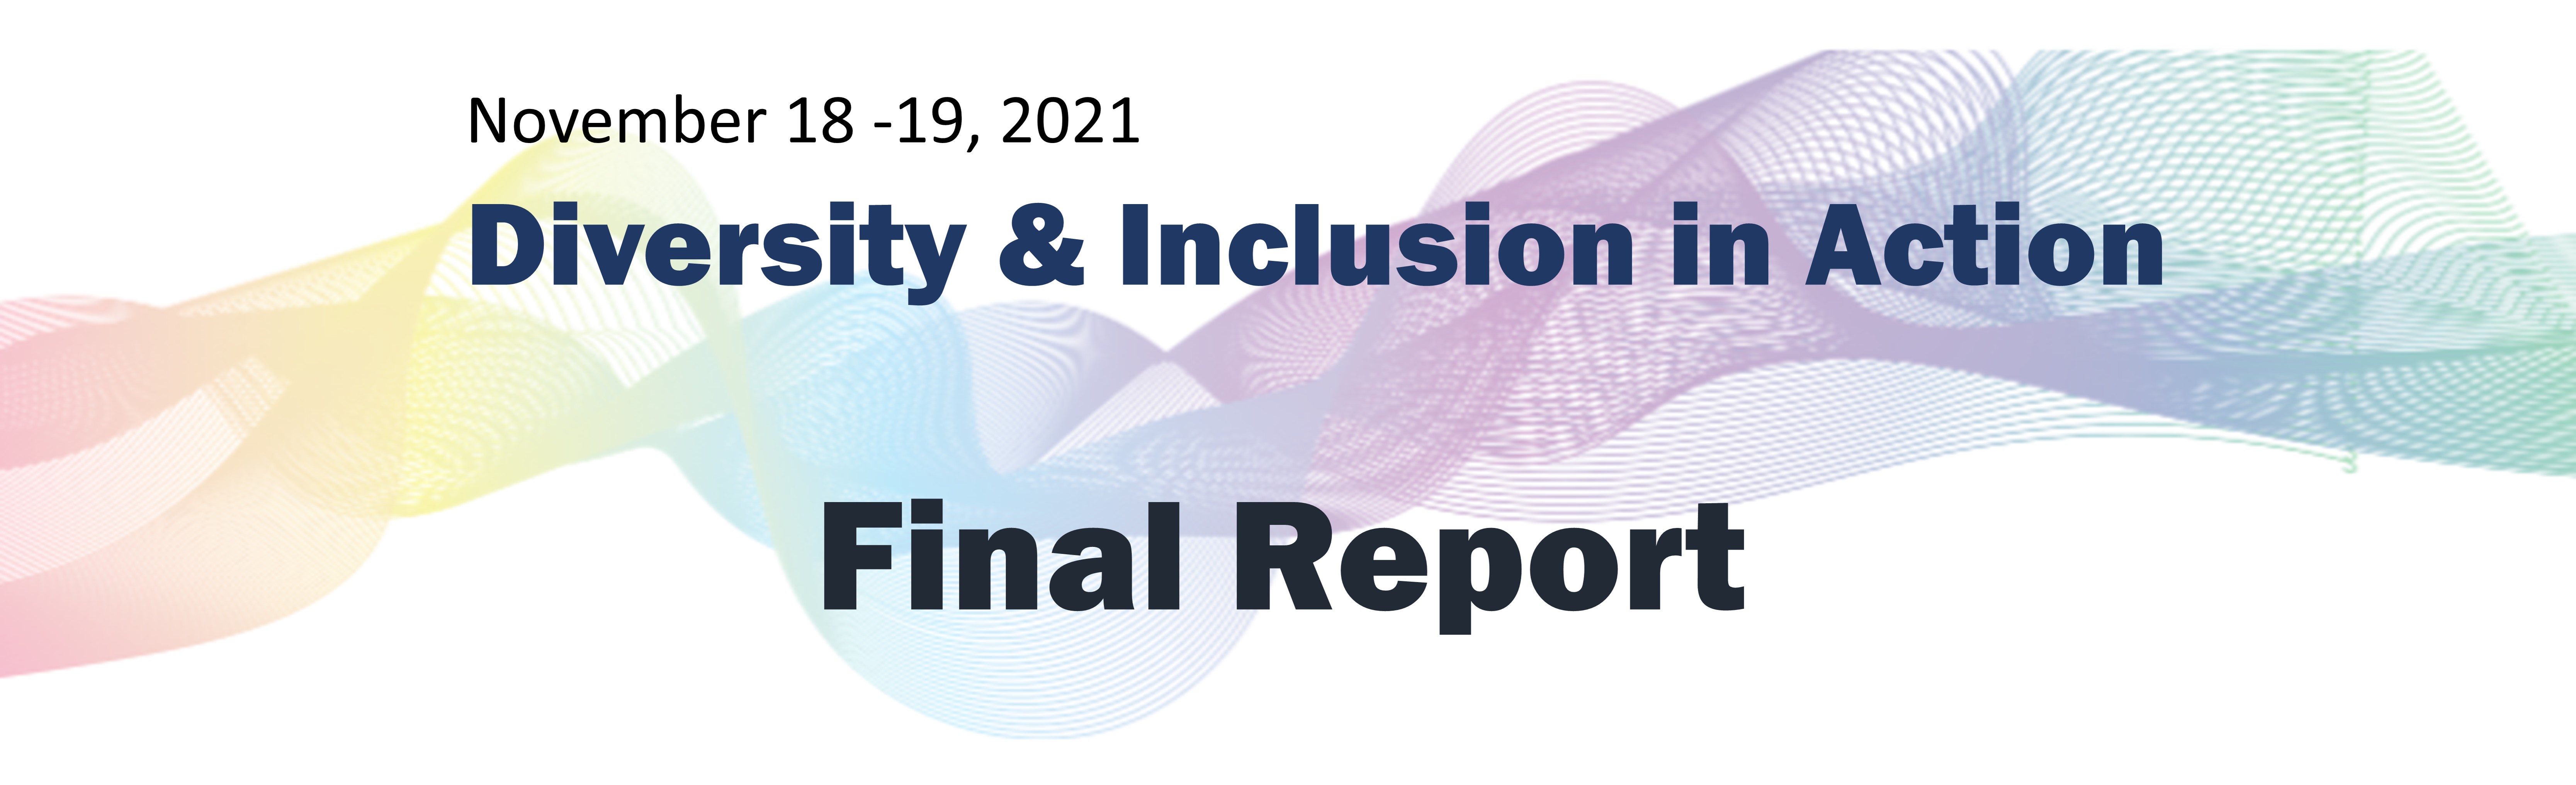 Diversity and Inclusion in Action Final Report